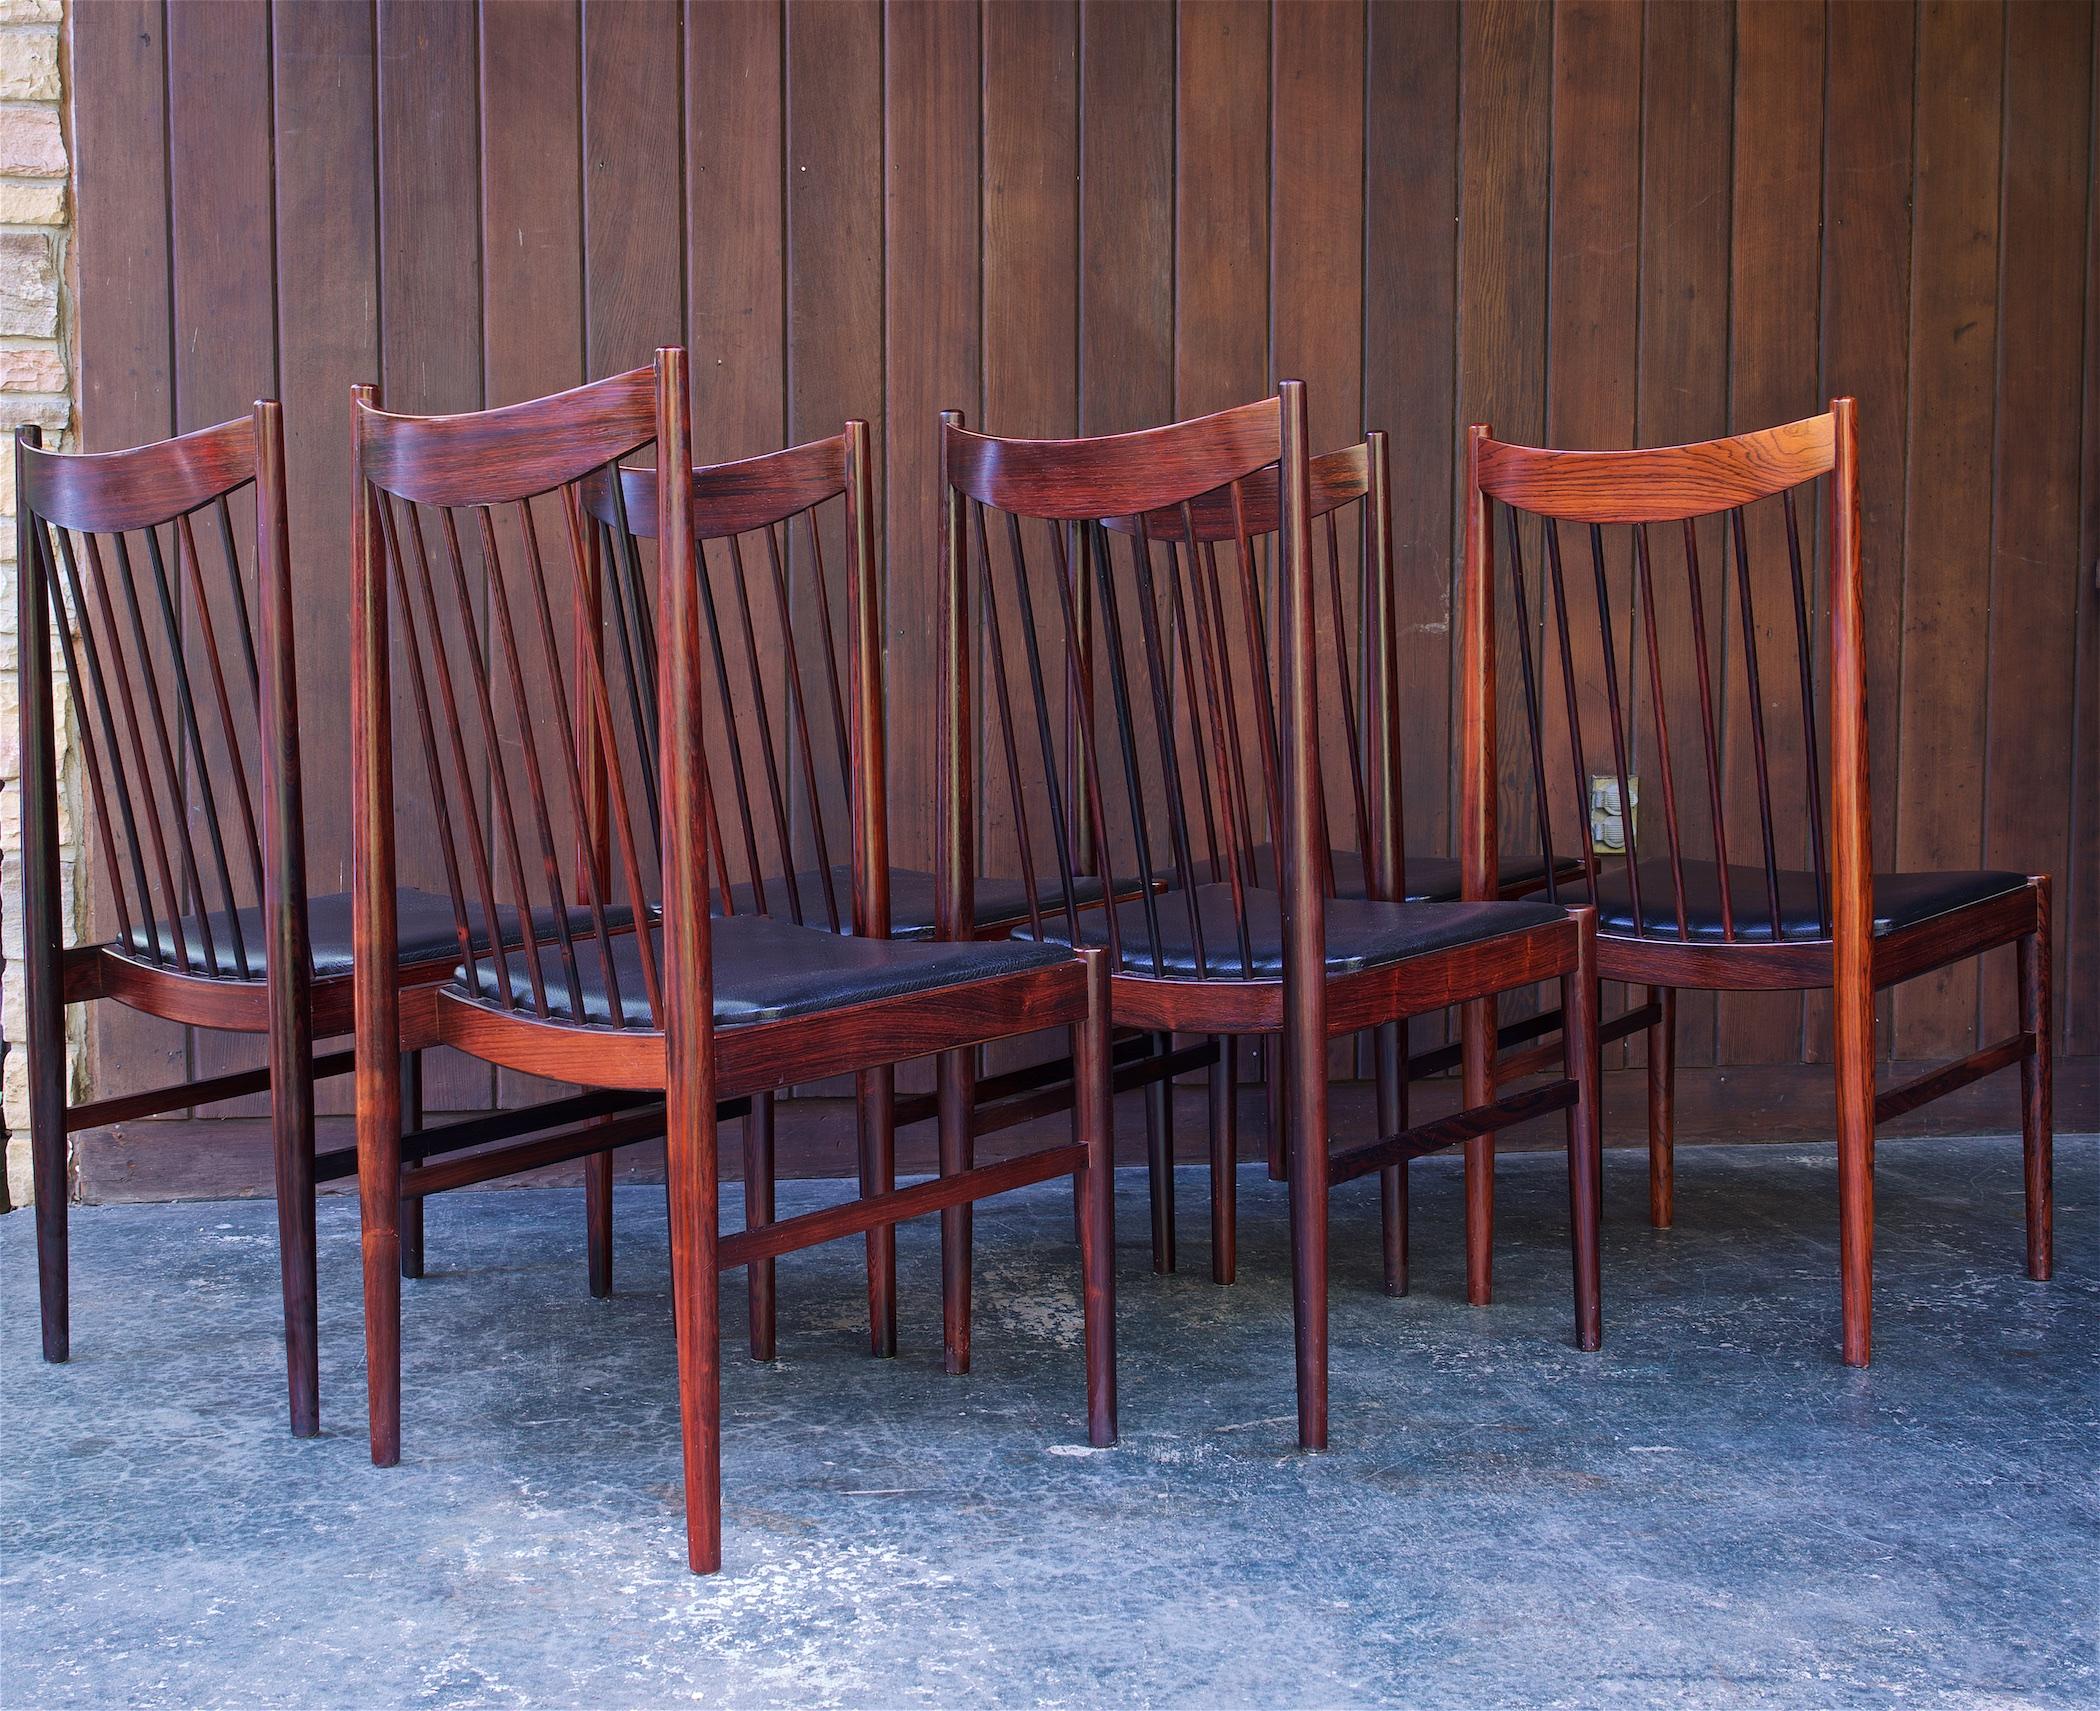 8 Brazilian Rosewood Spindle High-Back Dining Chairs Danish Sibast Model No. 422 For Sale 1